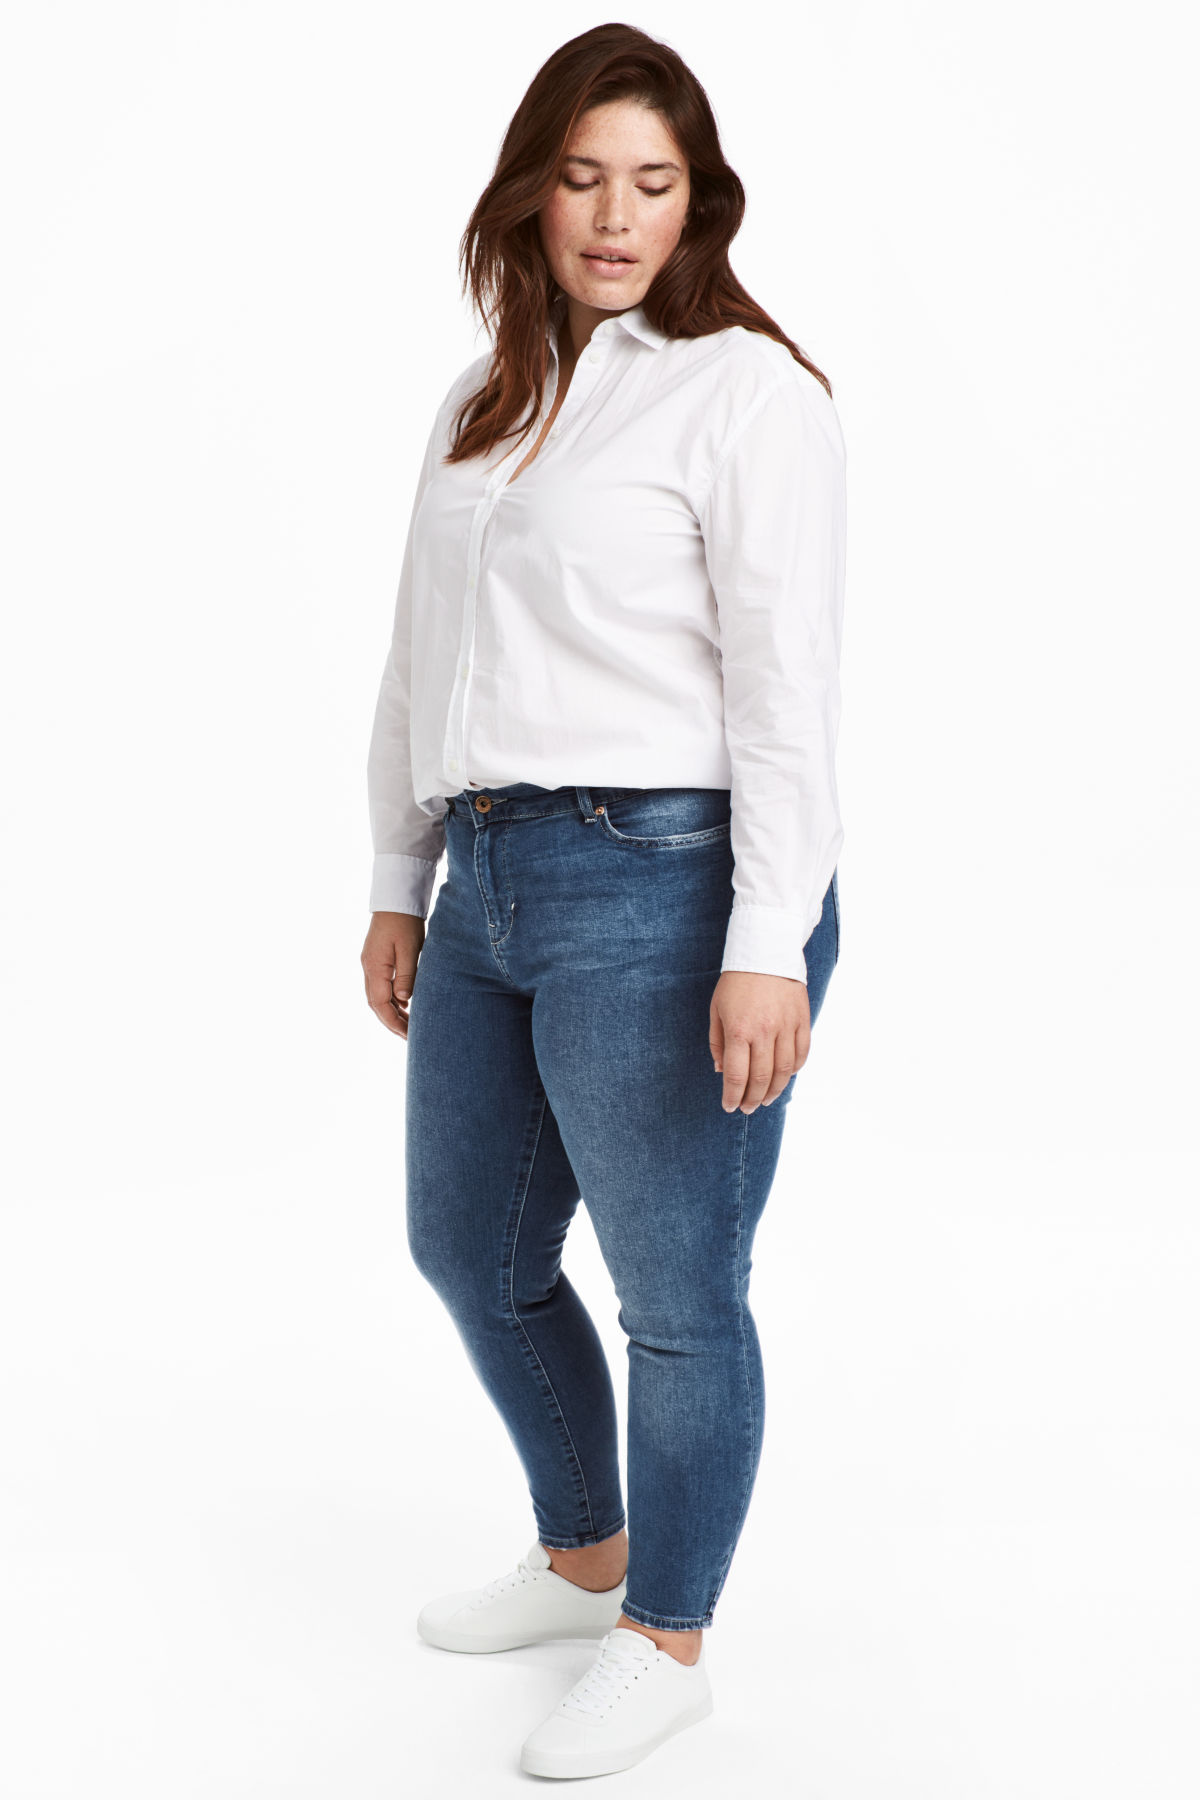 outfit plus size casual